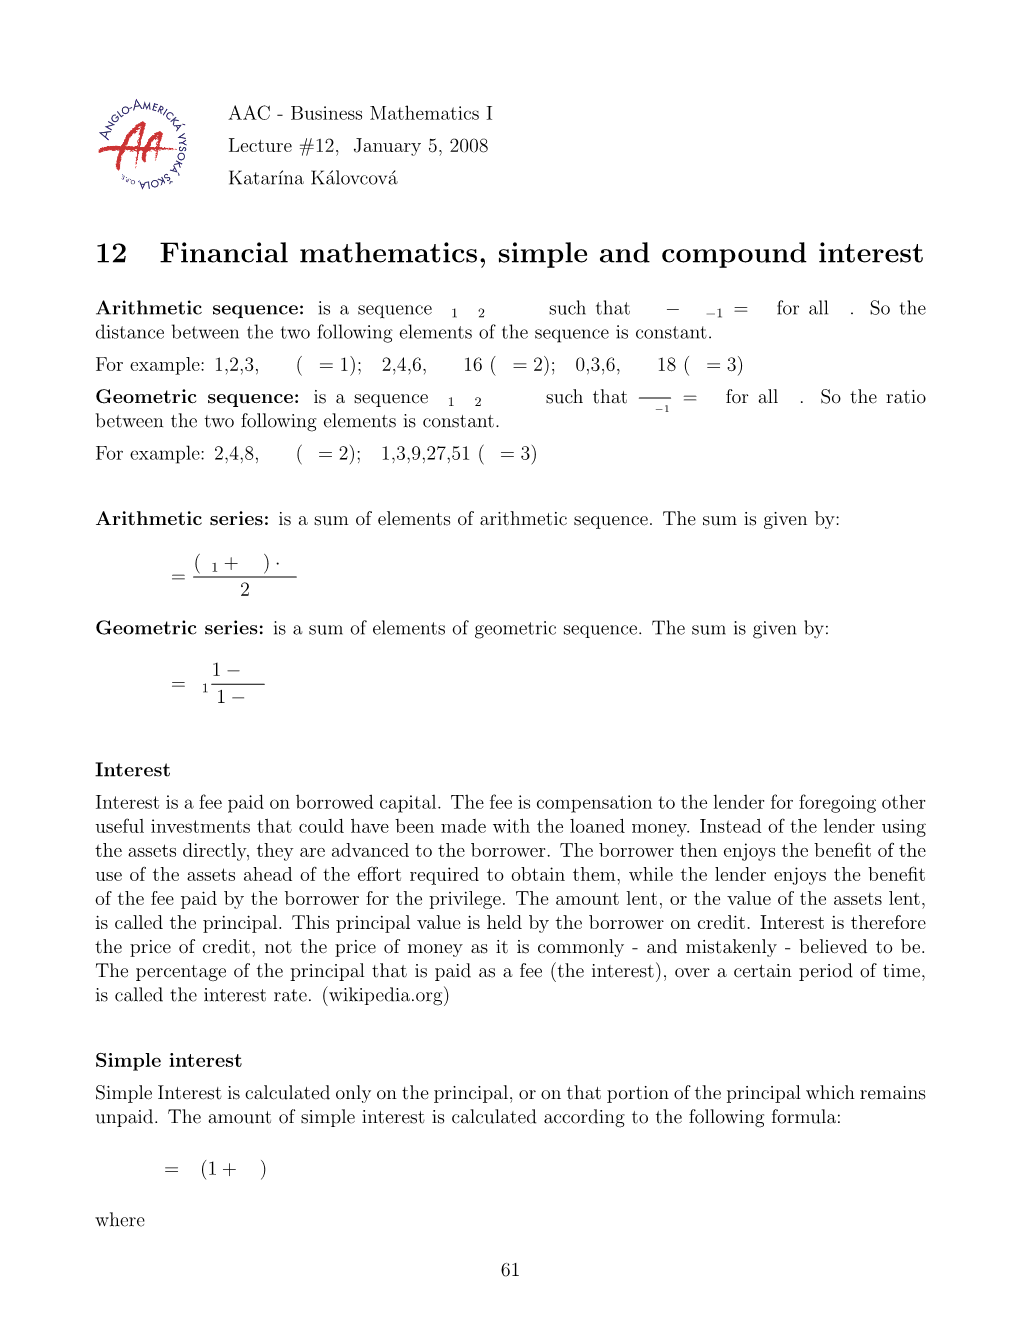 12 Financial Mathematics, Simple and Compound Interest